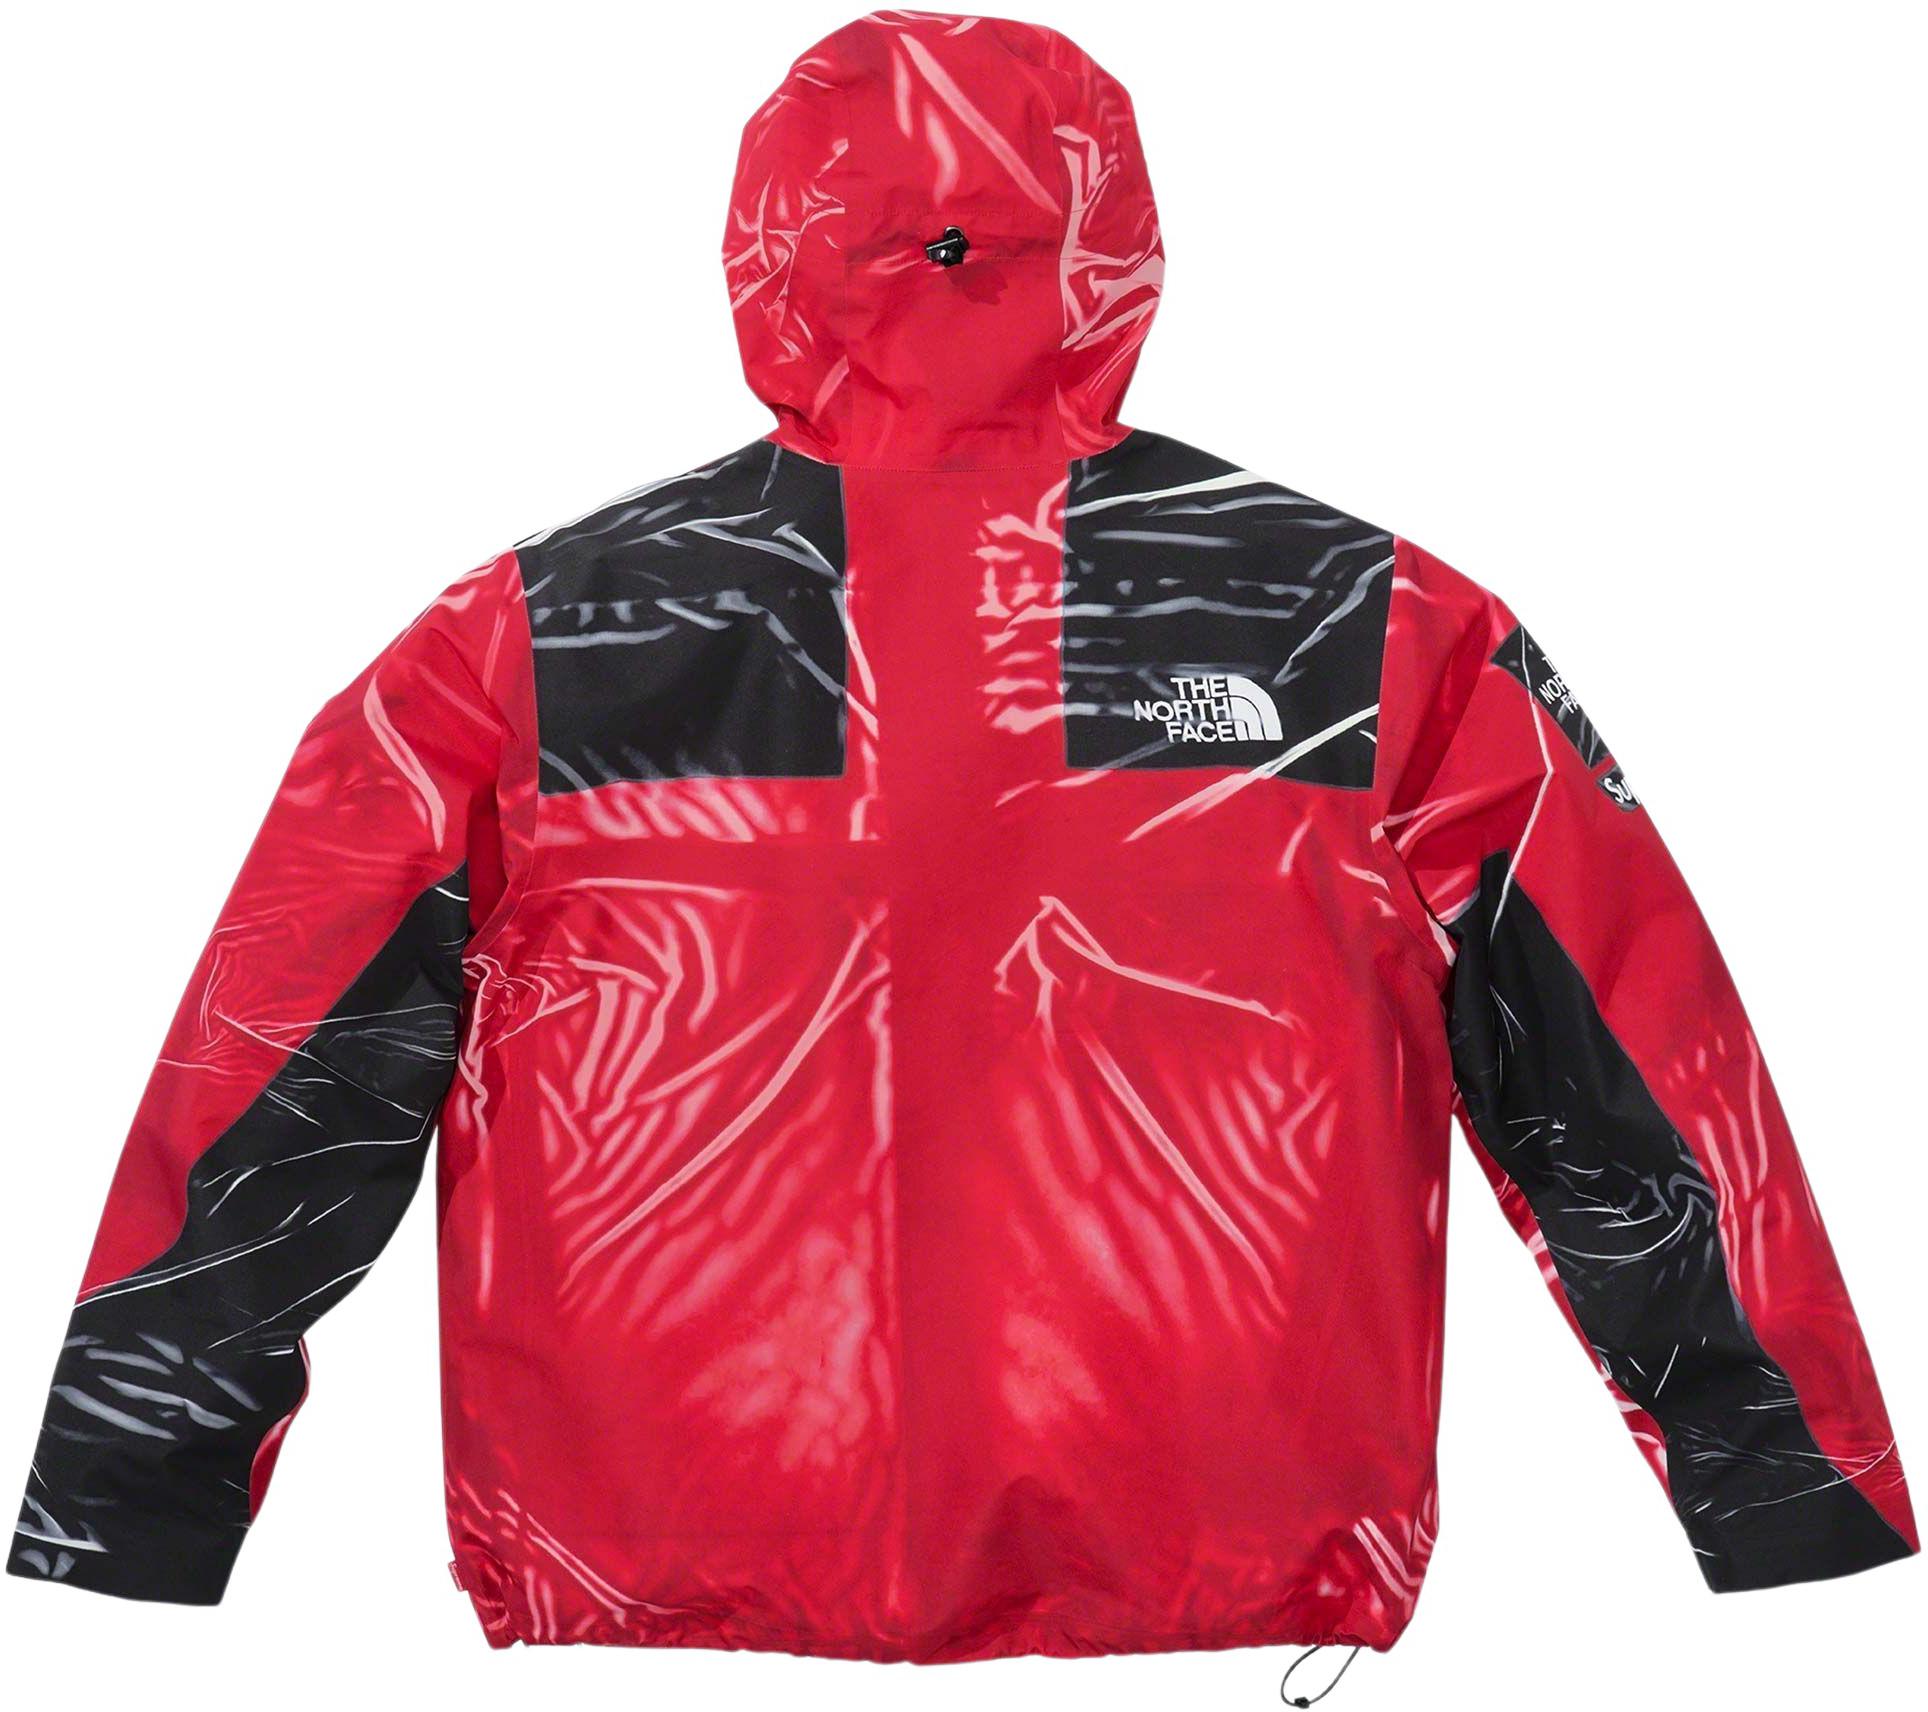 The North Face Trompe L'oeil Printed Taped Seam Shell Jacket